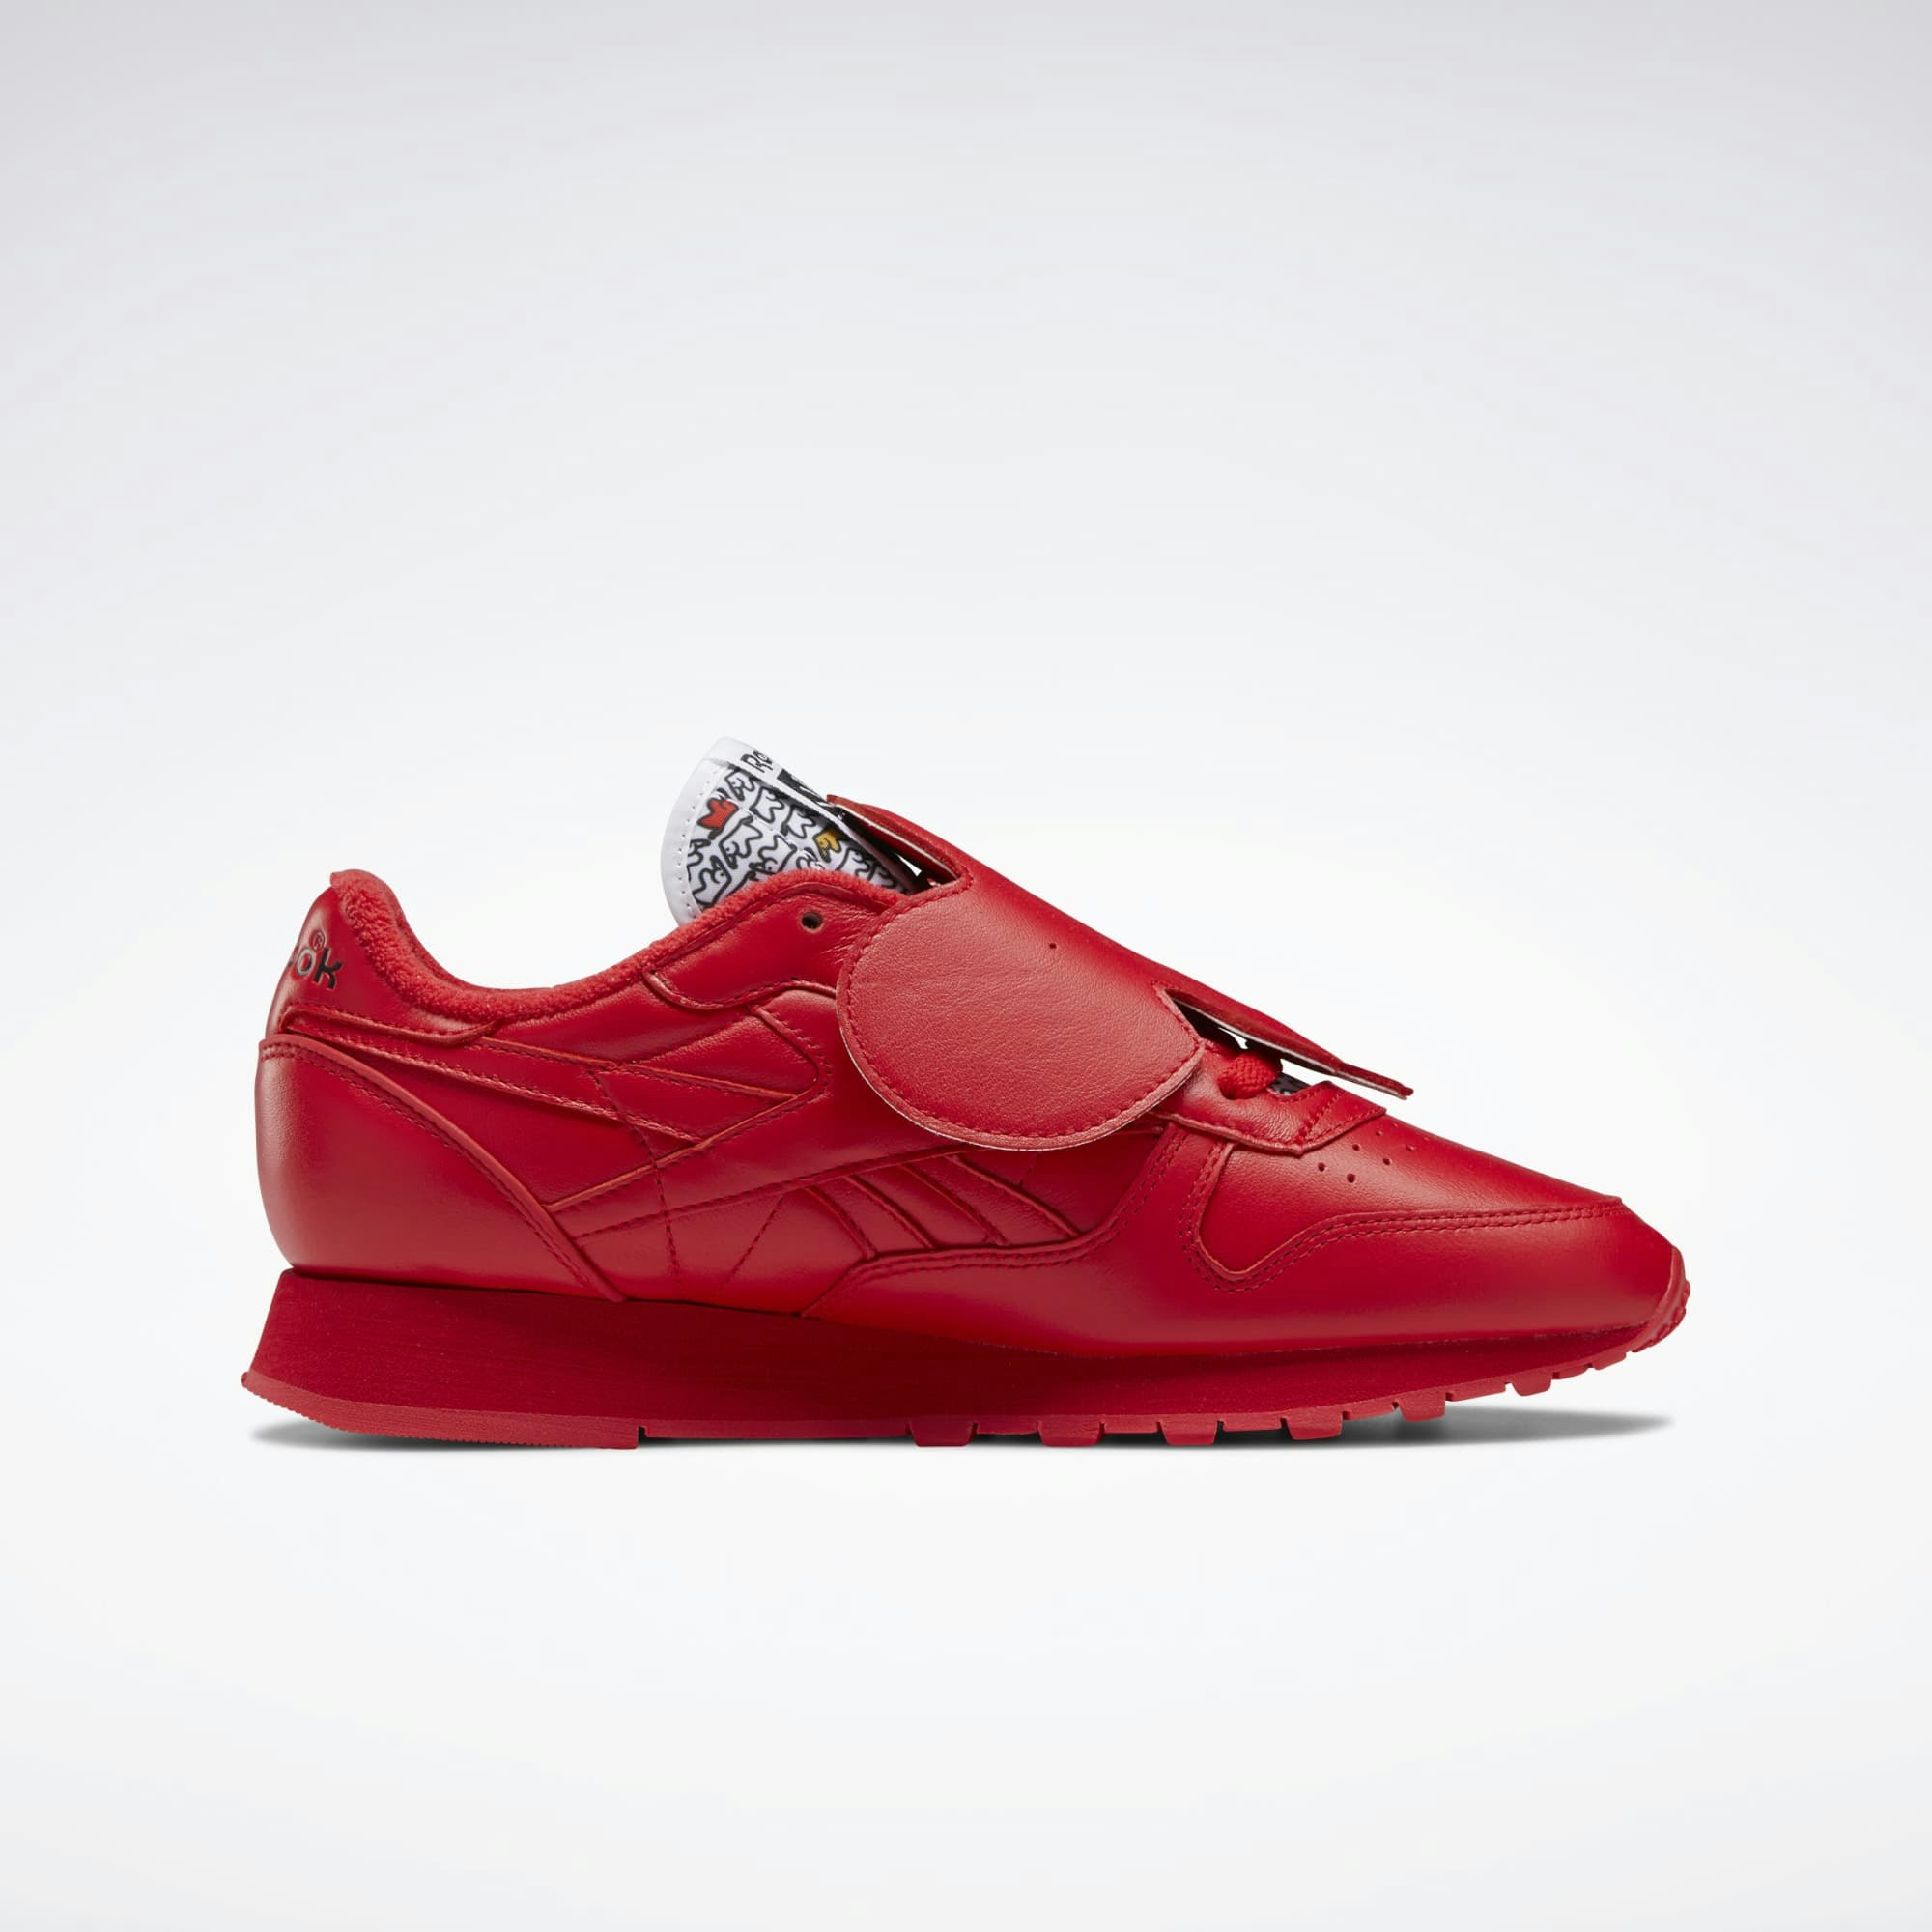 Eames x Reebok Classic Leather "Red Elephant"